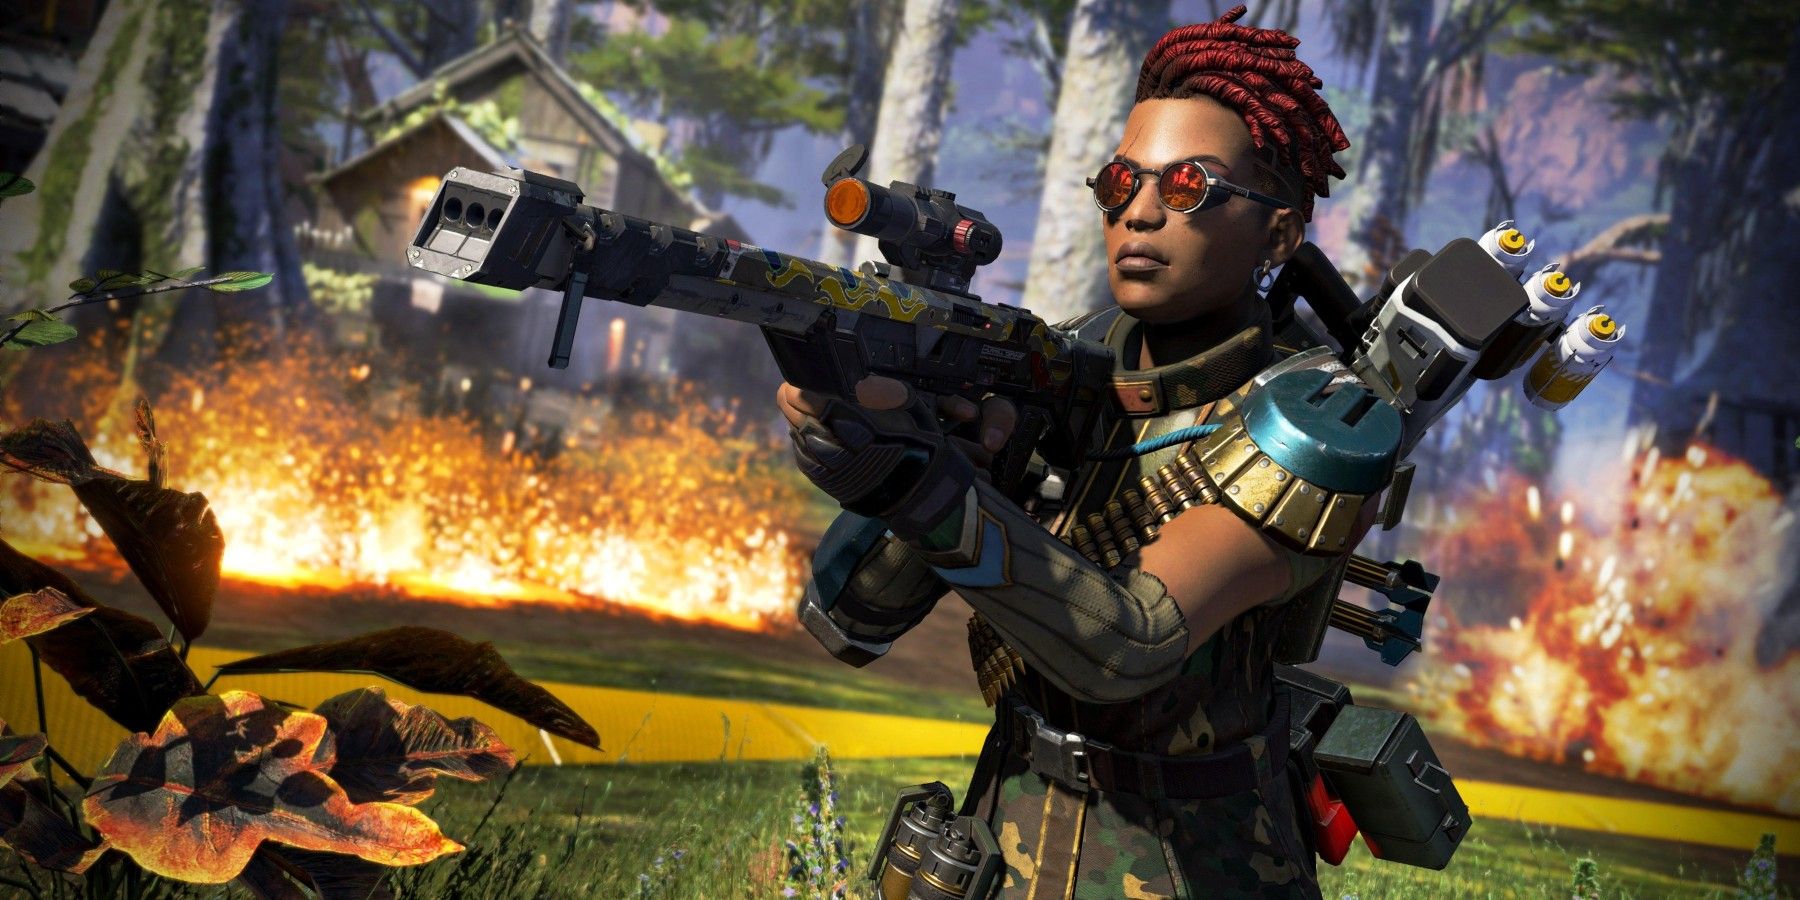 Some Apex Legends Players Want Changes Made to Ranked to Address Smurfing Problems